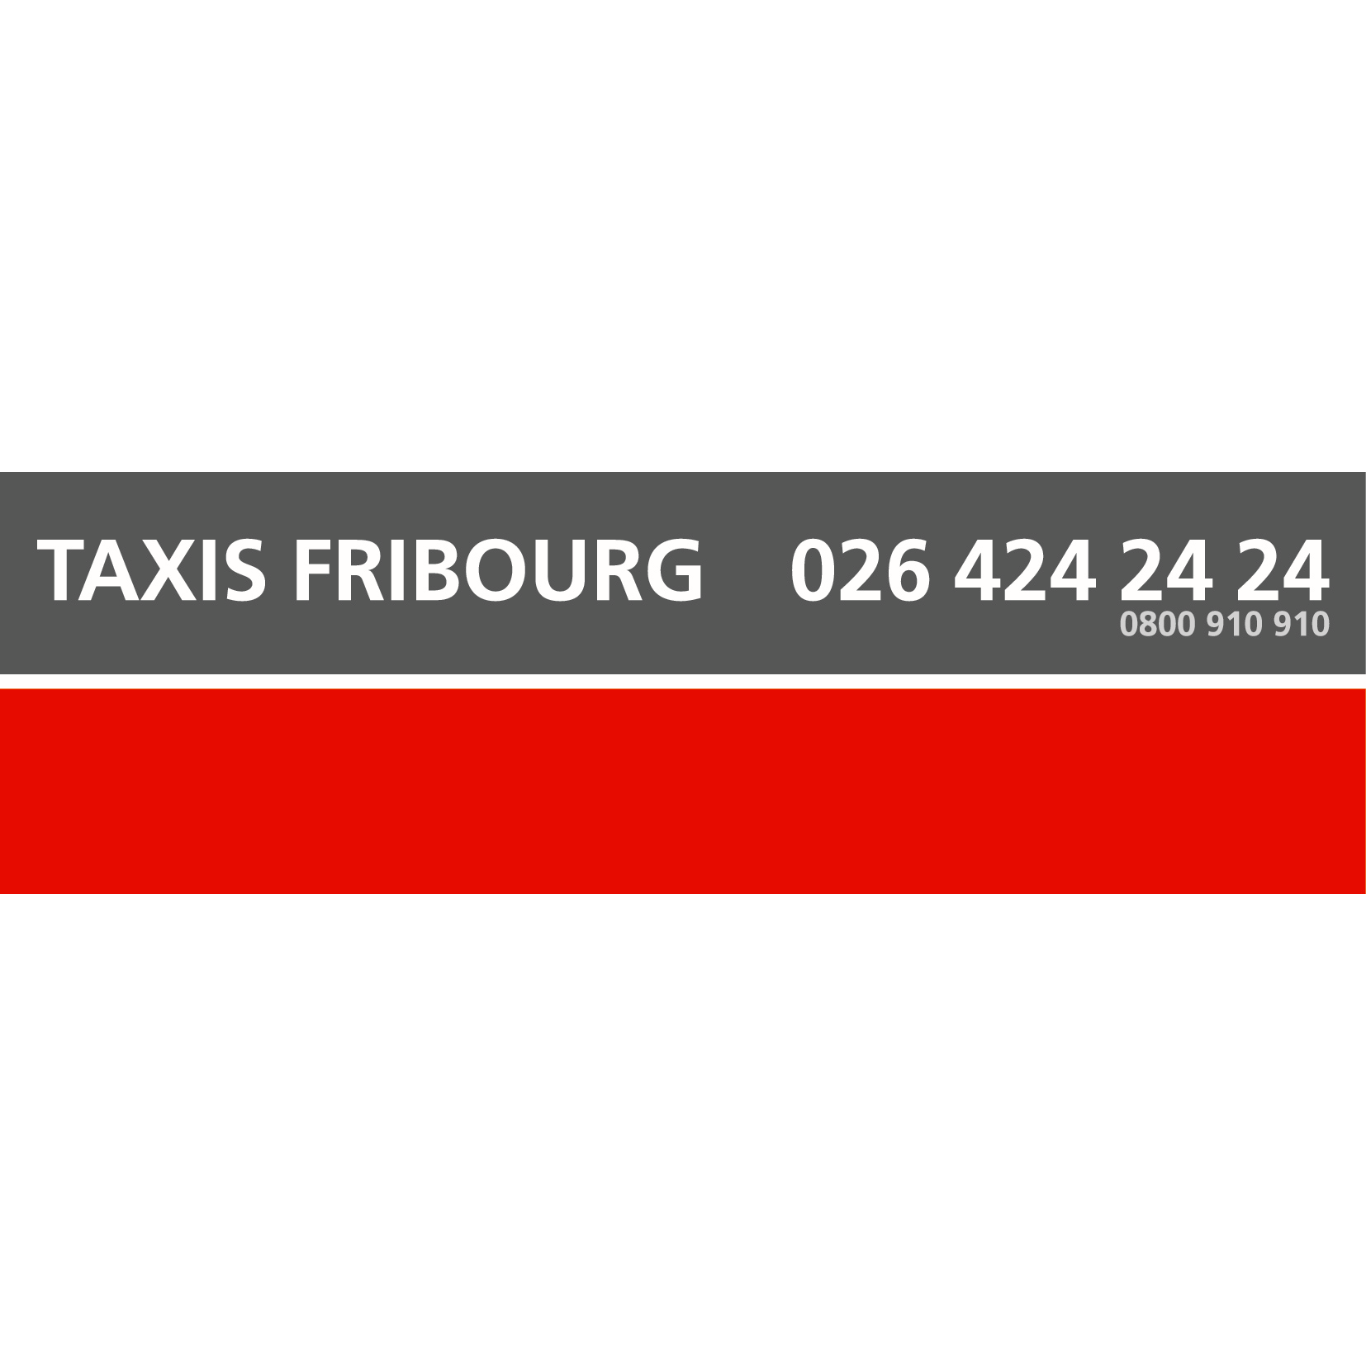 Taxis Fribourg Logo